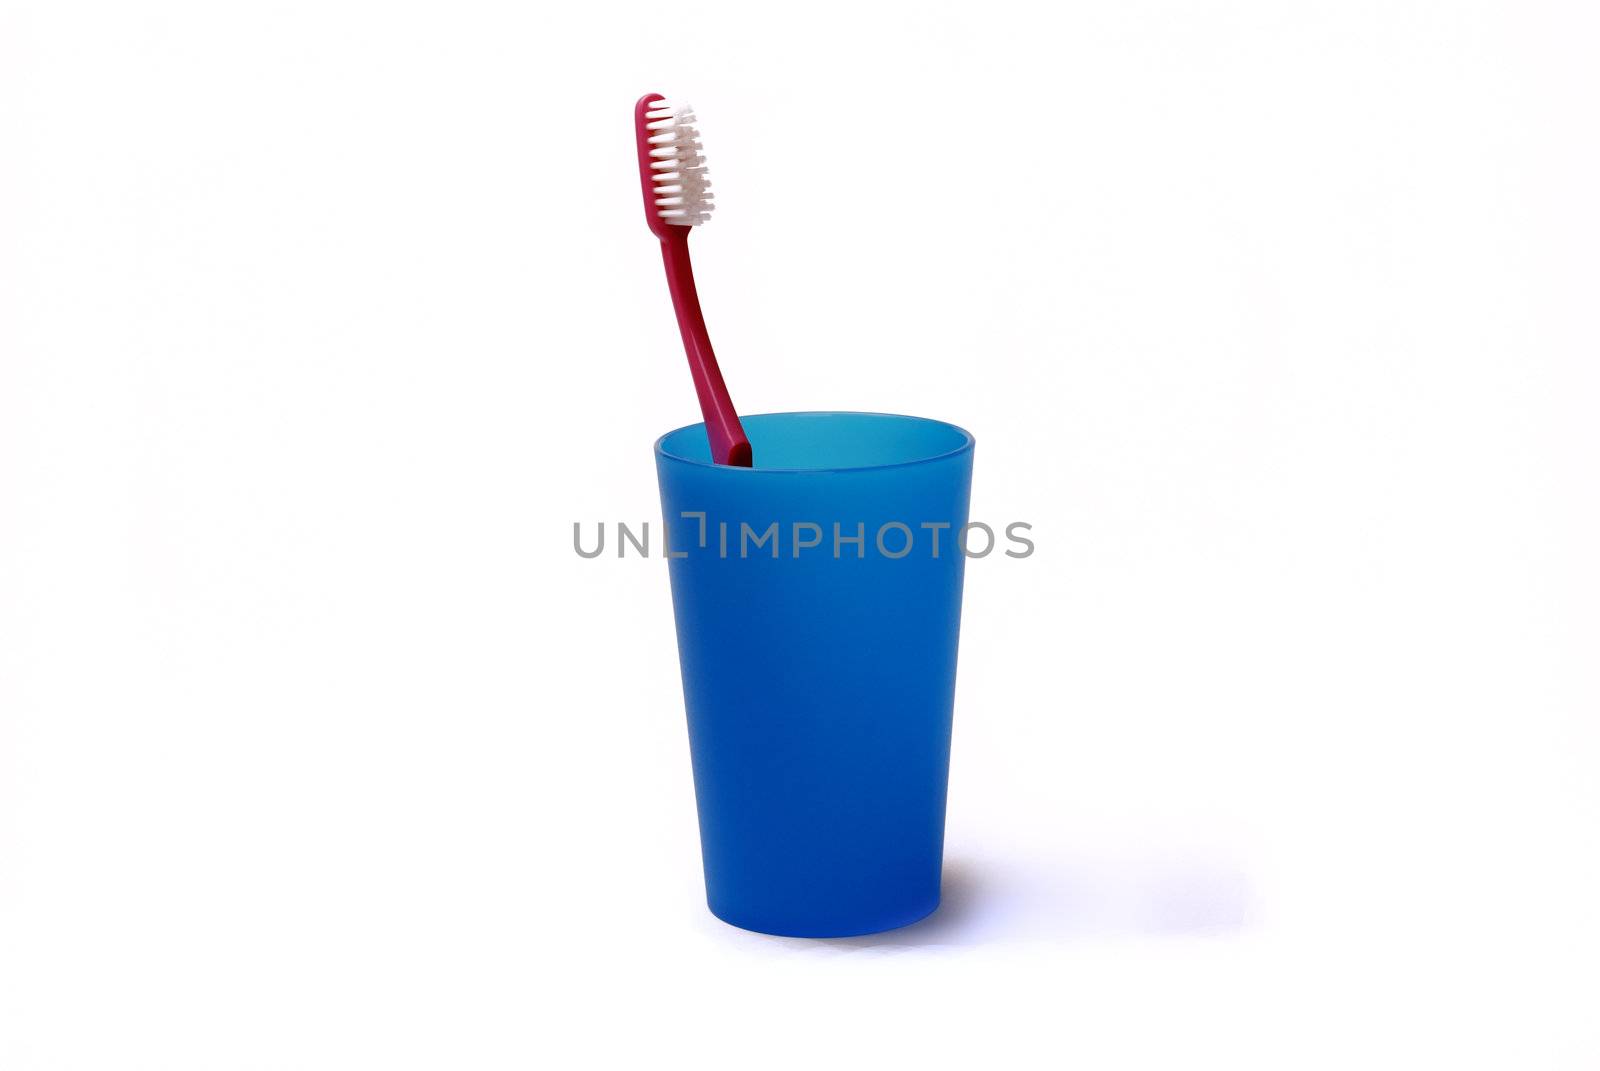 Toothbrush in a color holder